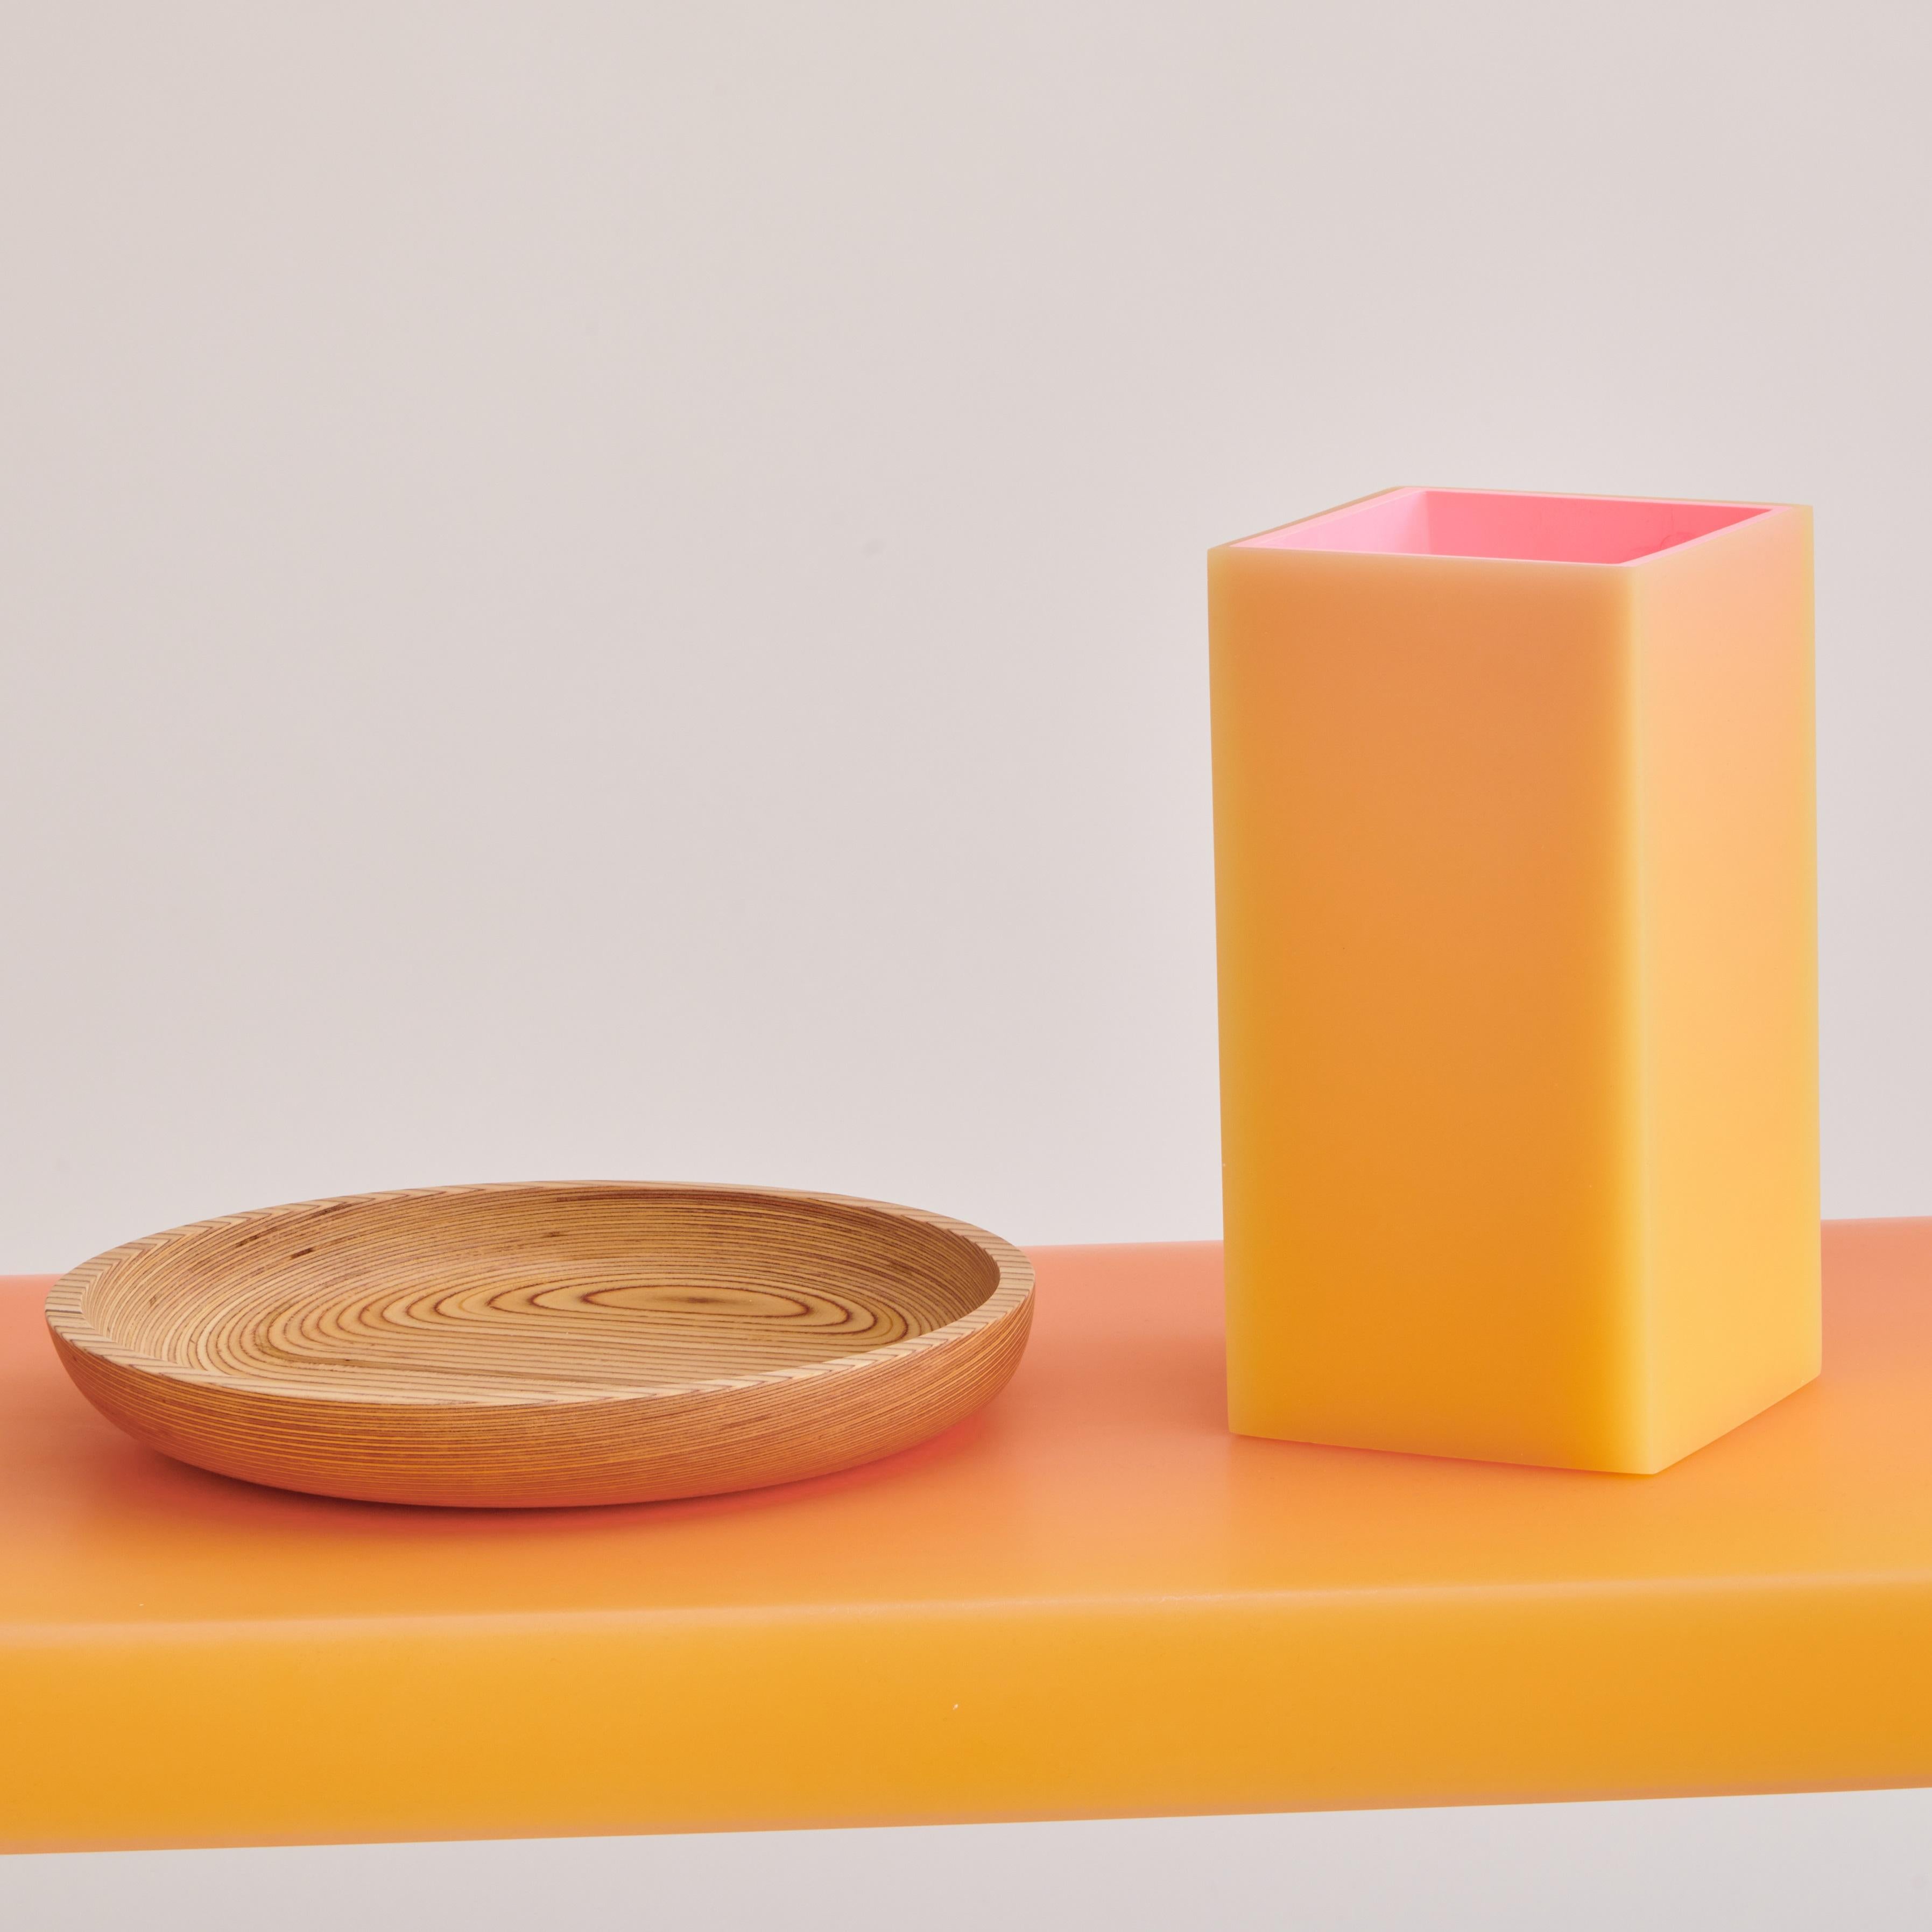 Square Resin Vase in orange and yellow. Featuring a glowing exterior with colors melding in the peachy hue spectrum, from a pink interior underneath.